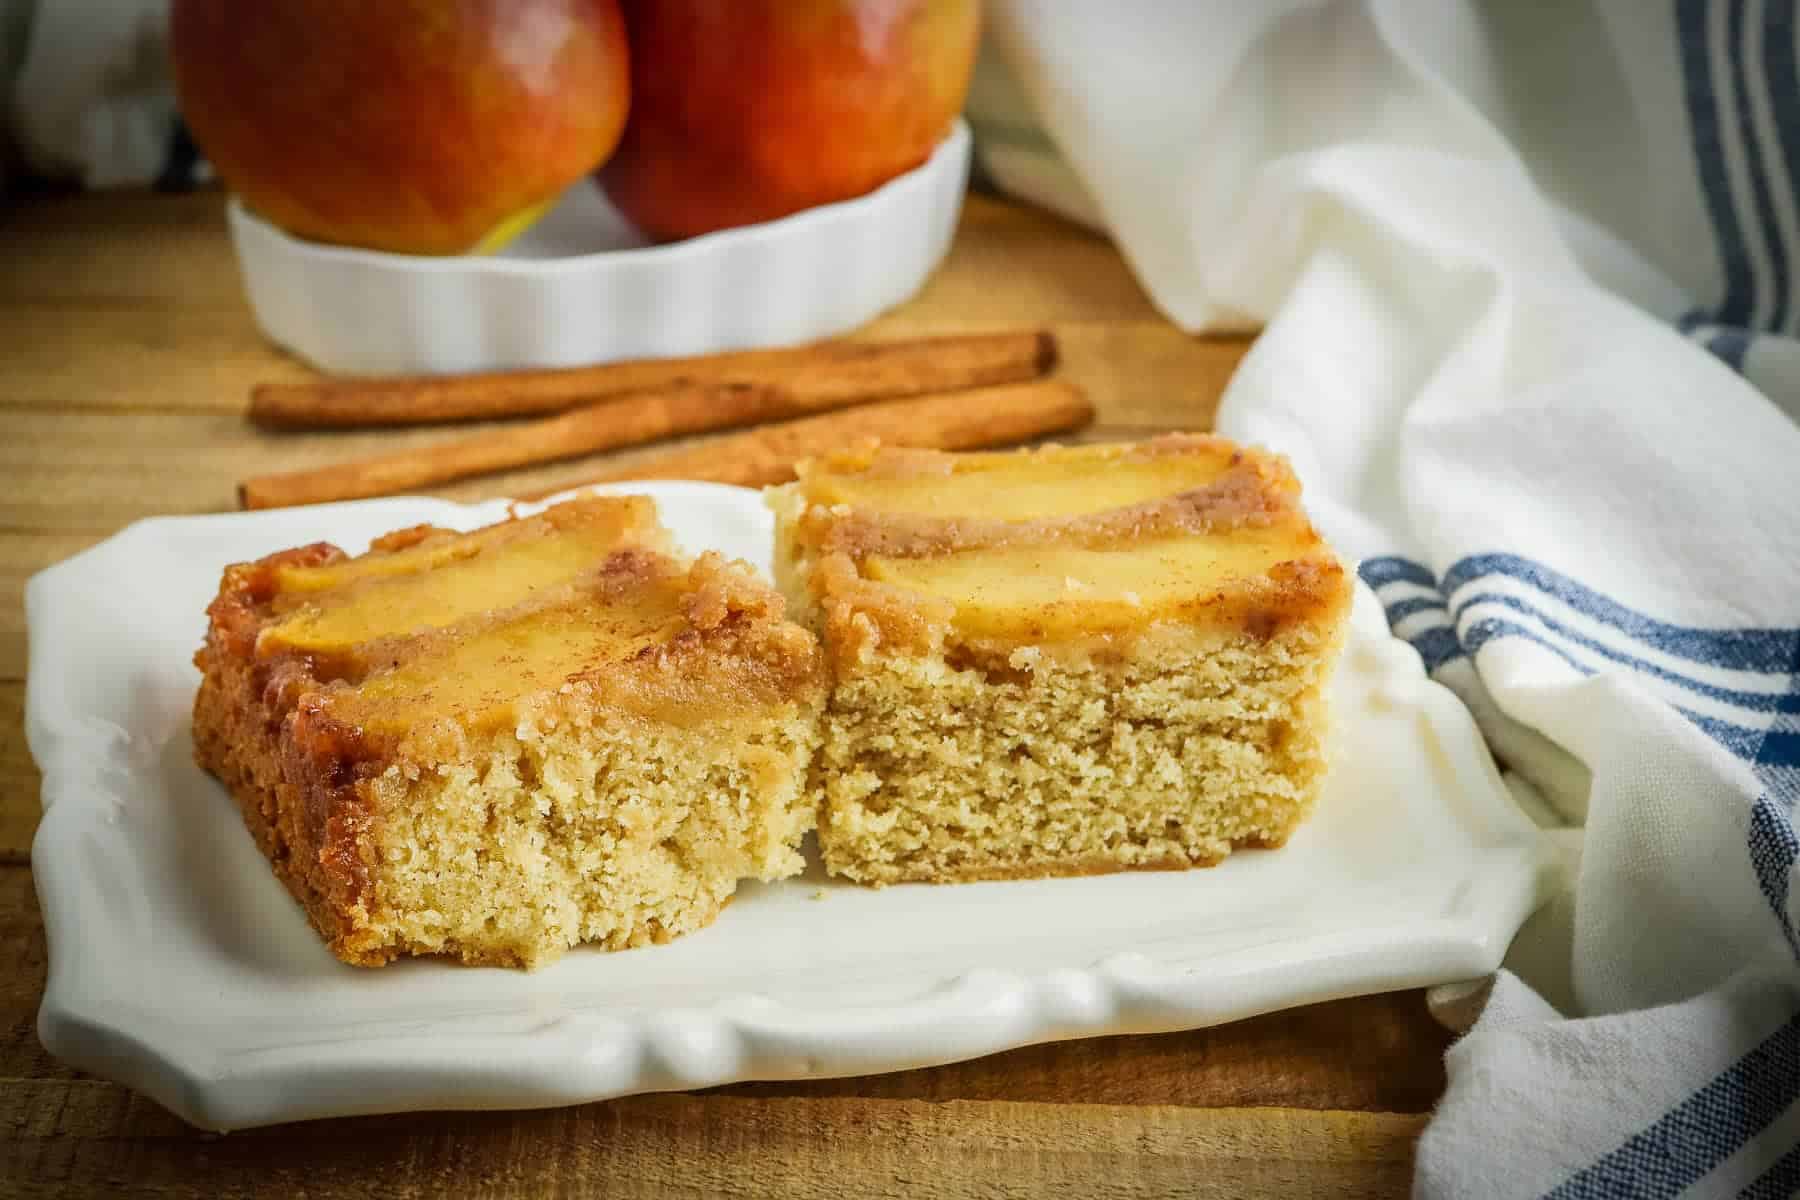 A slice of apple cake on a plate with cinnamon sticks.